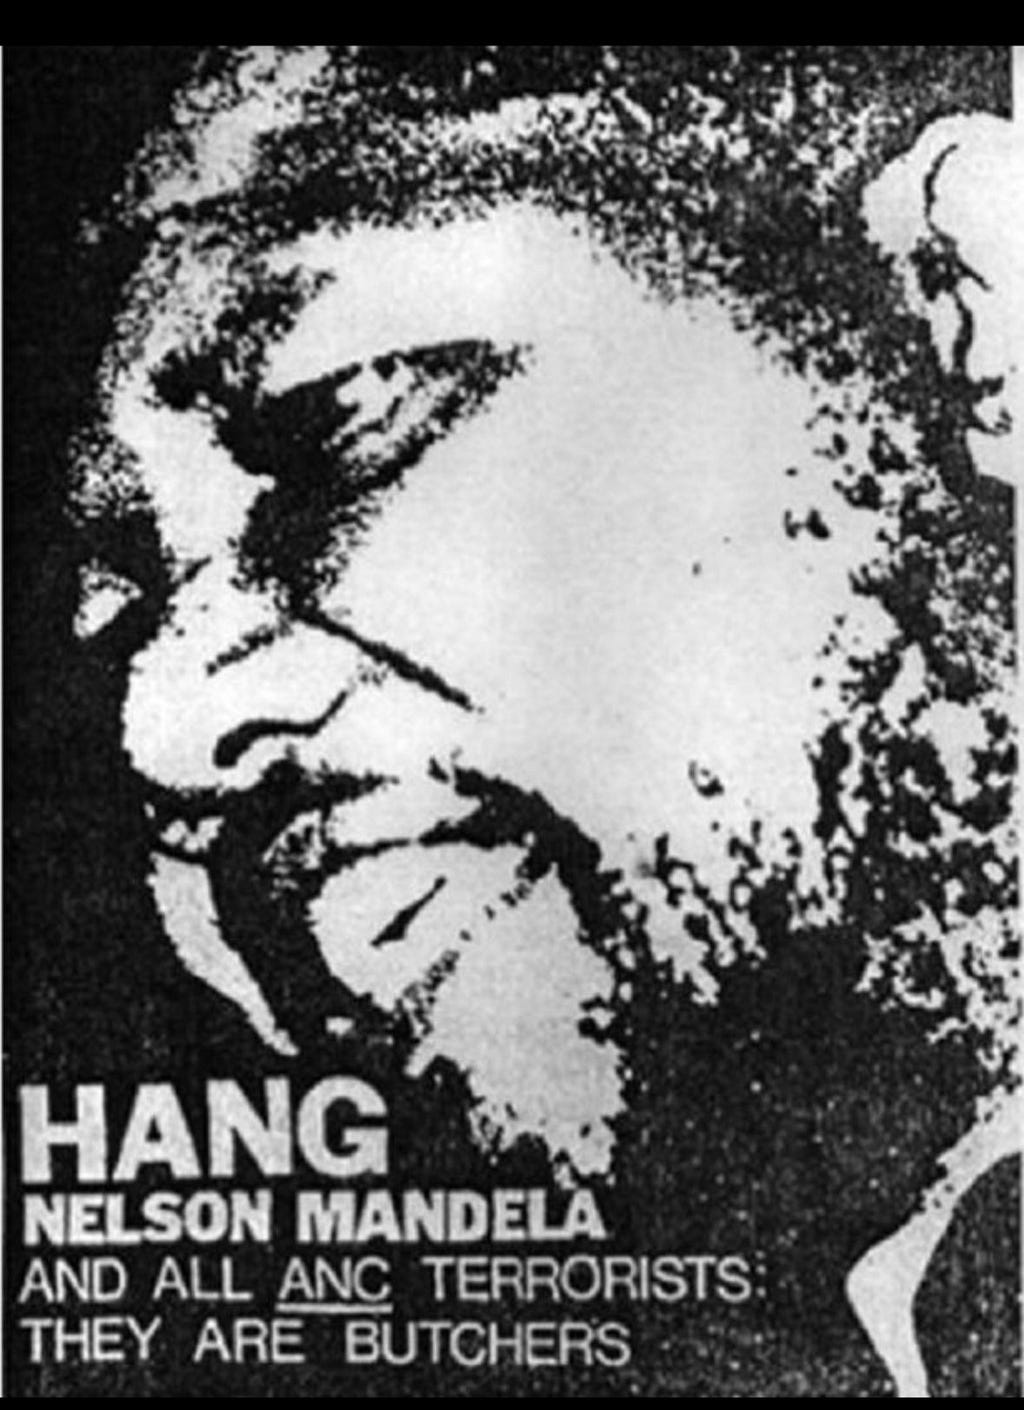 Poster for Mandela and ANC being declared terrorists